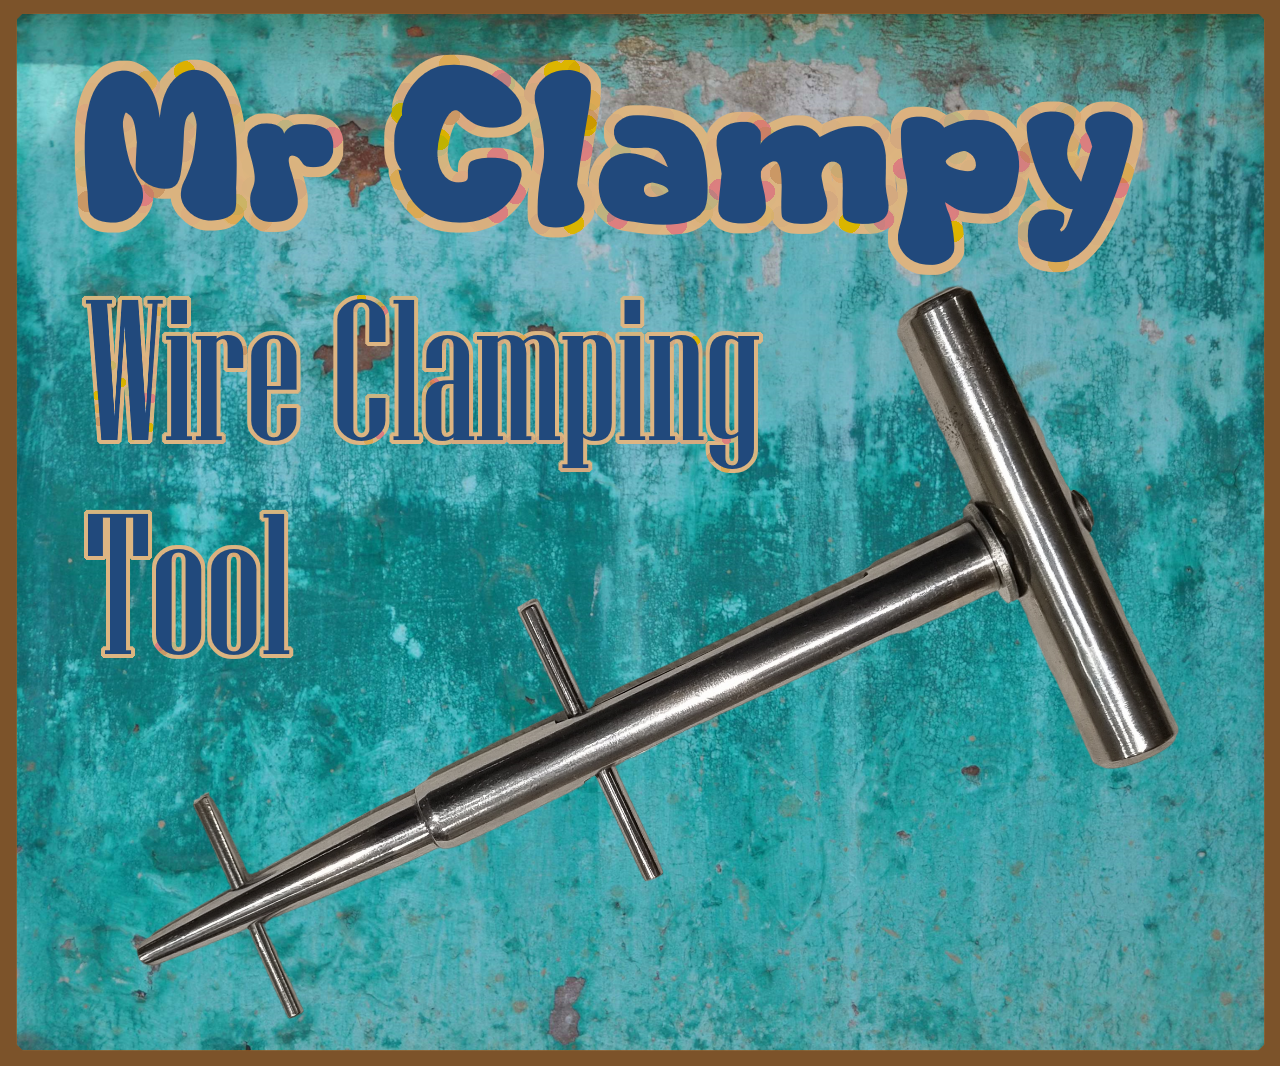 Mr Clampy the Wire Clamper